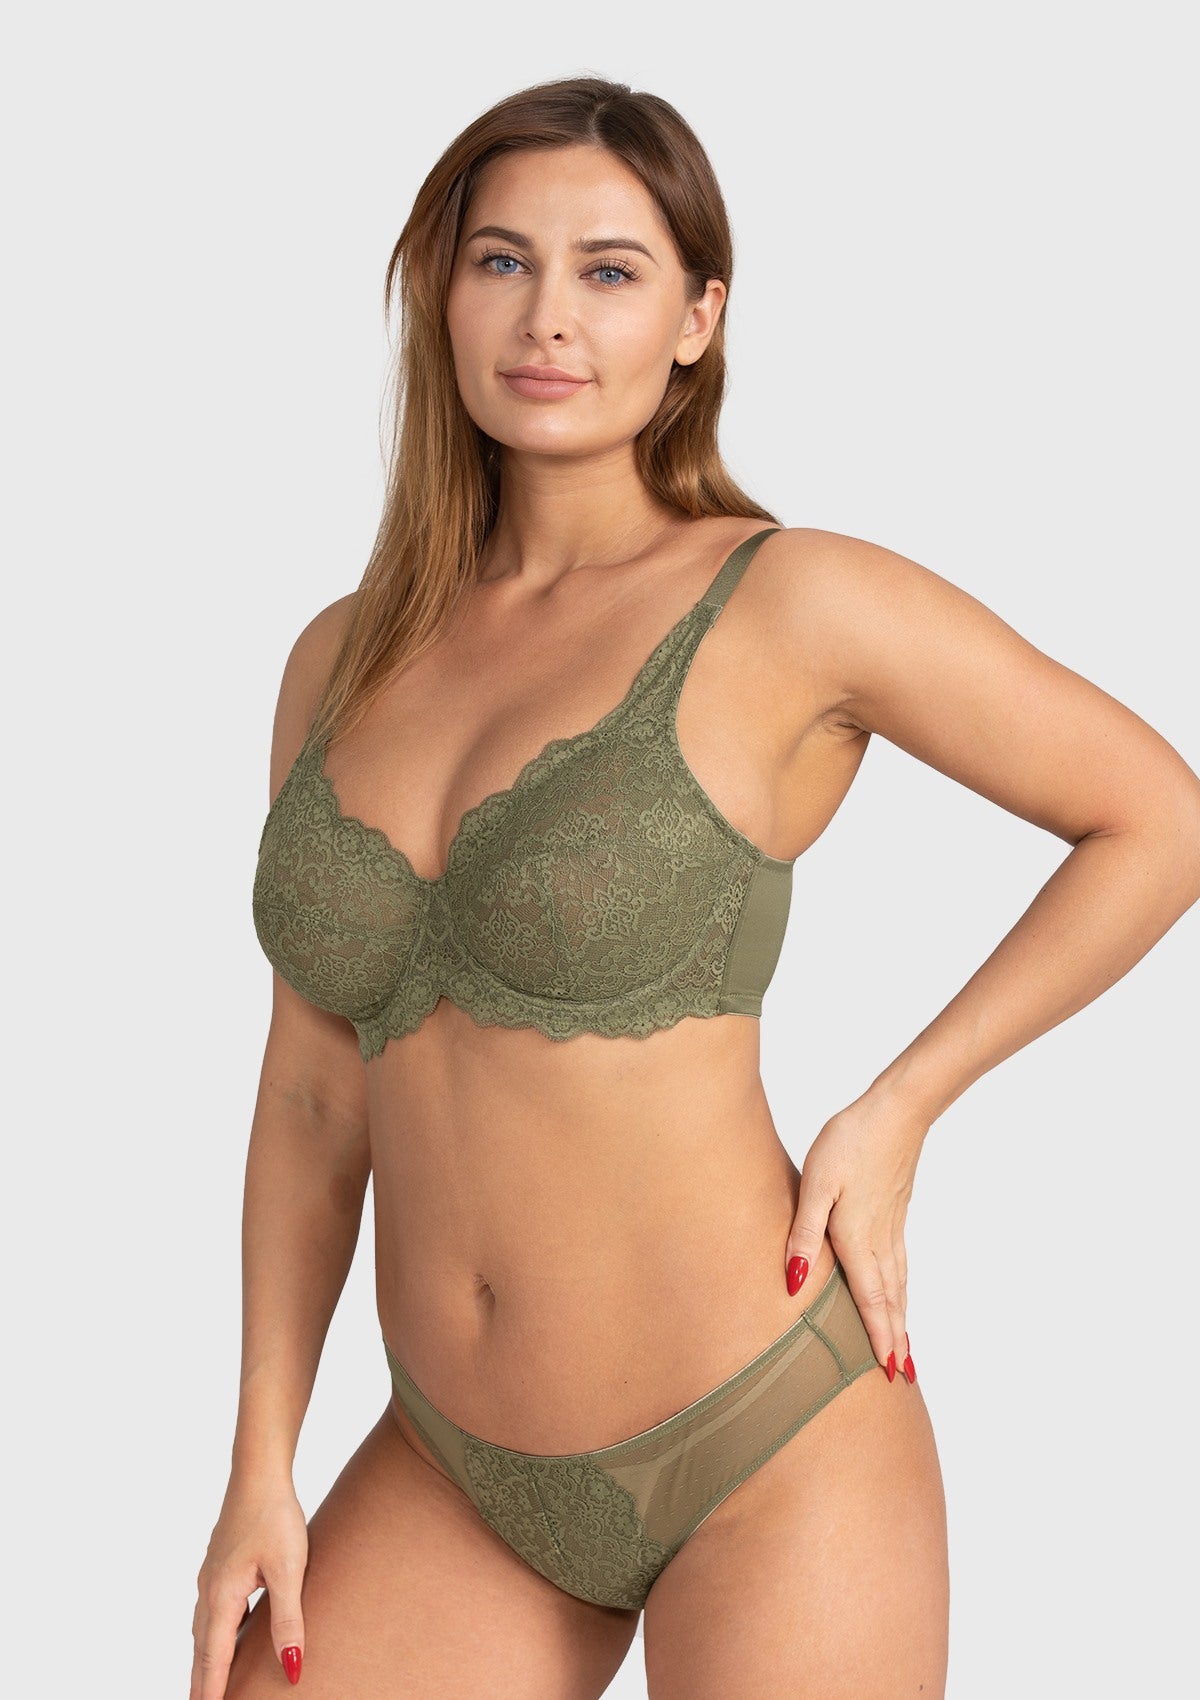 HSIA All-Over Floral Lace Unlined Bra: Minimizer Bra For Heavy Breasts - Dark Green / 42 / D